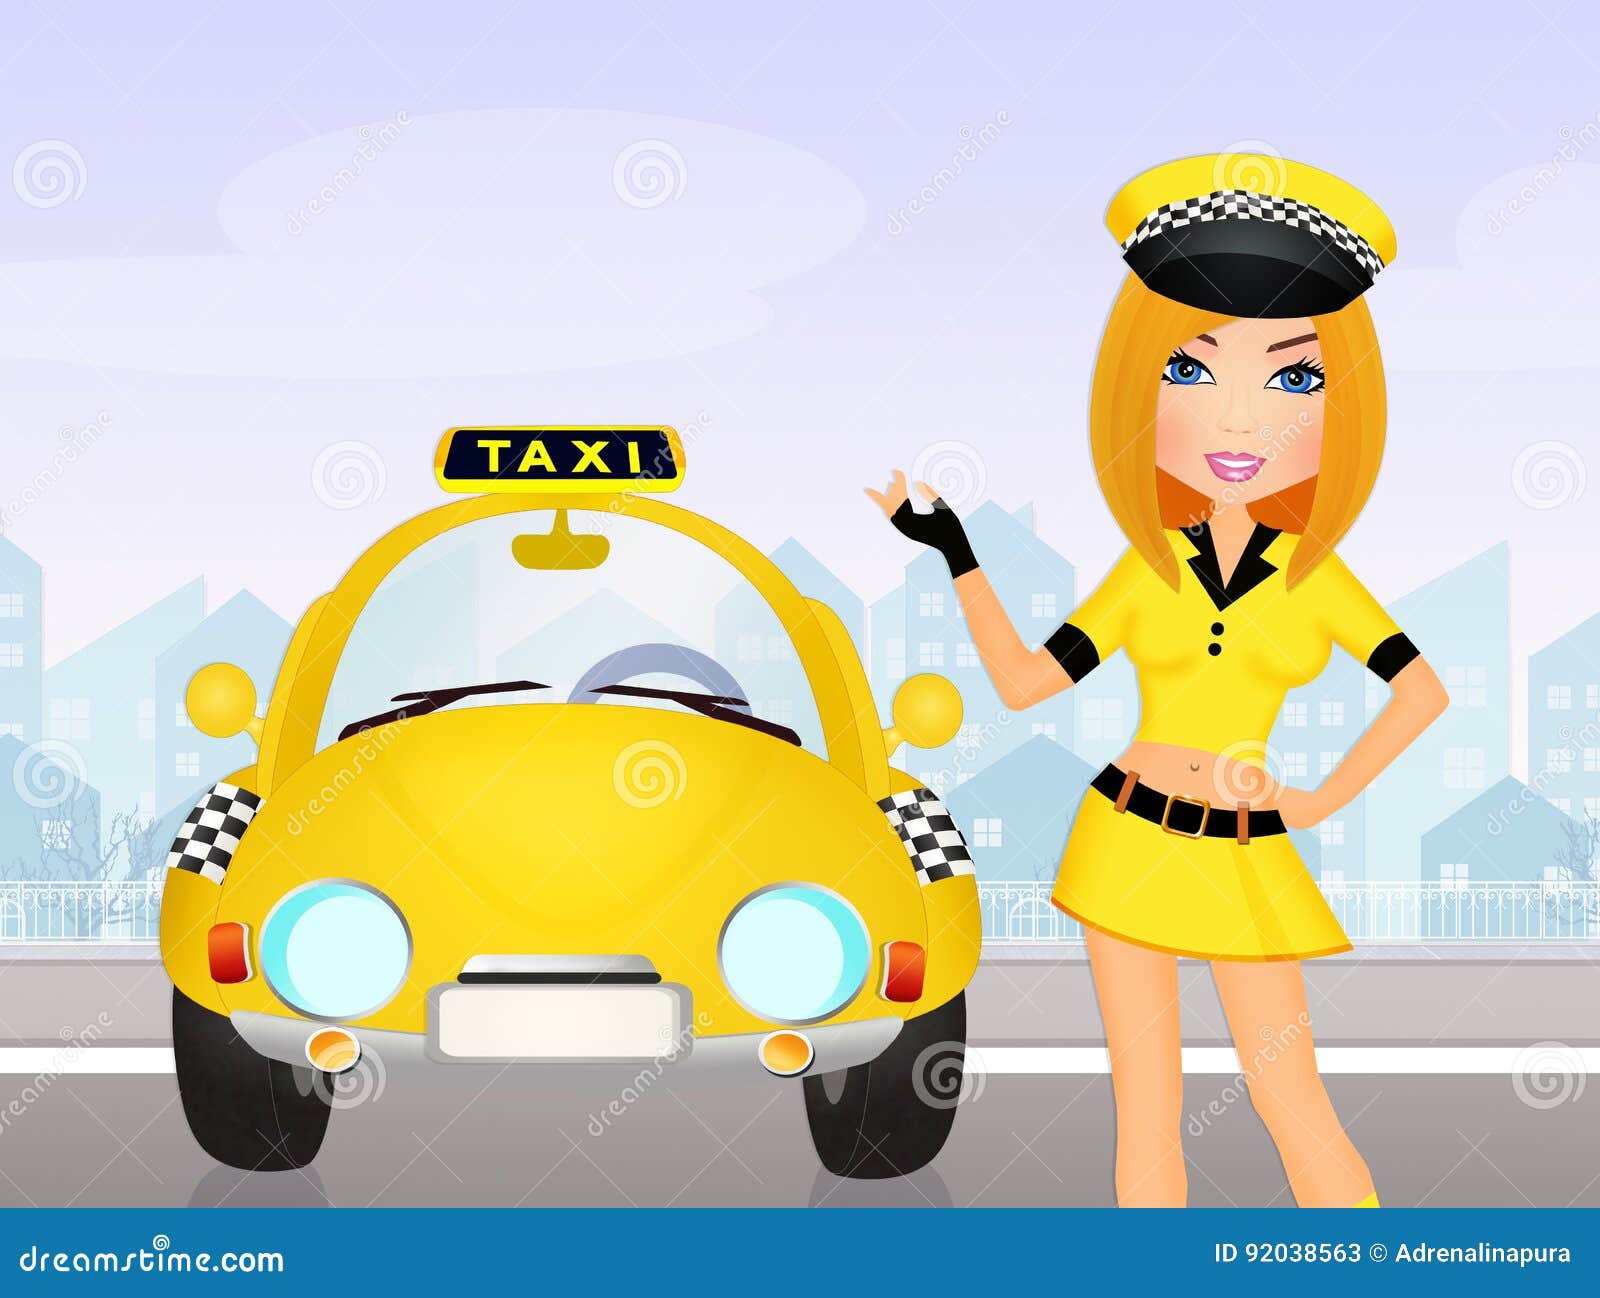 Girl Taxi driver stock illustration. Illustration of taxi - 92038563